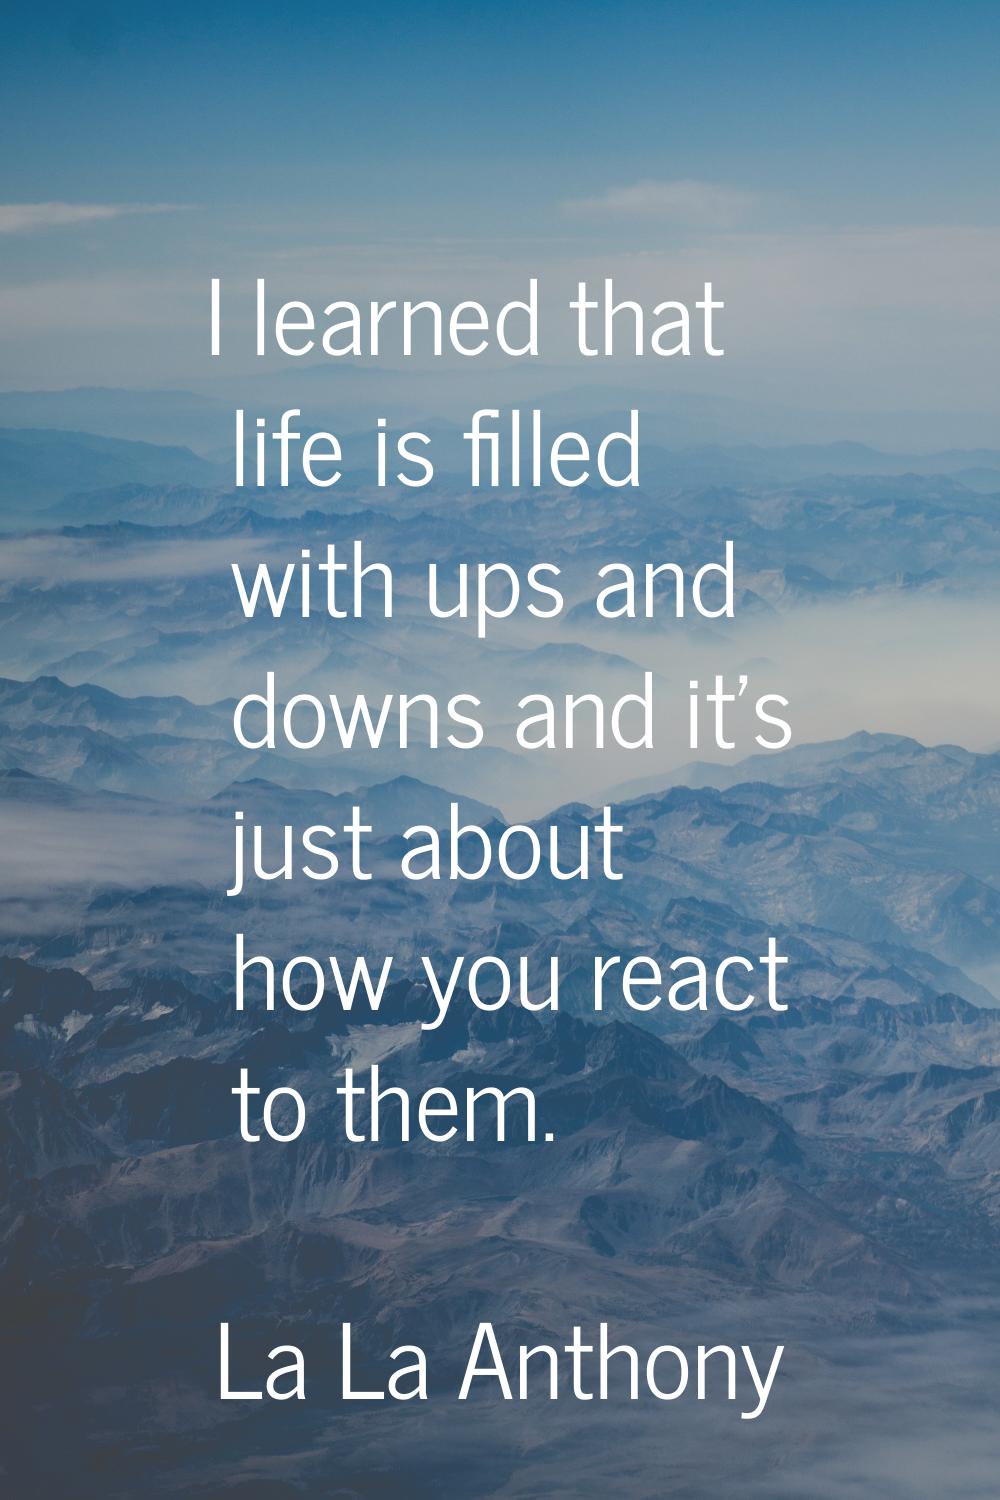 I learned that life is filled with ups and downs and it's just about how you react to them.